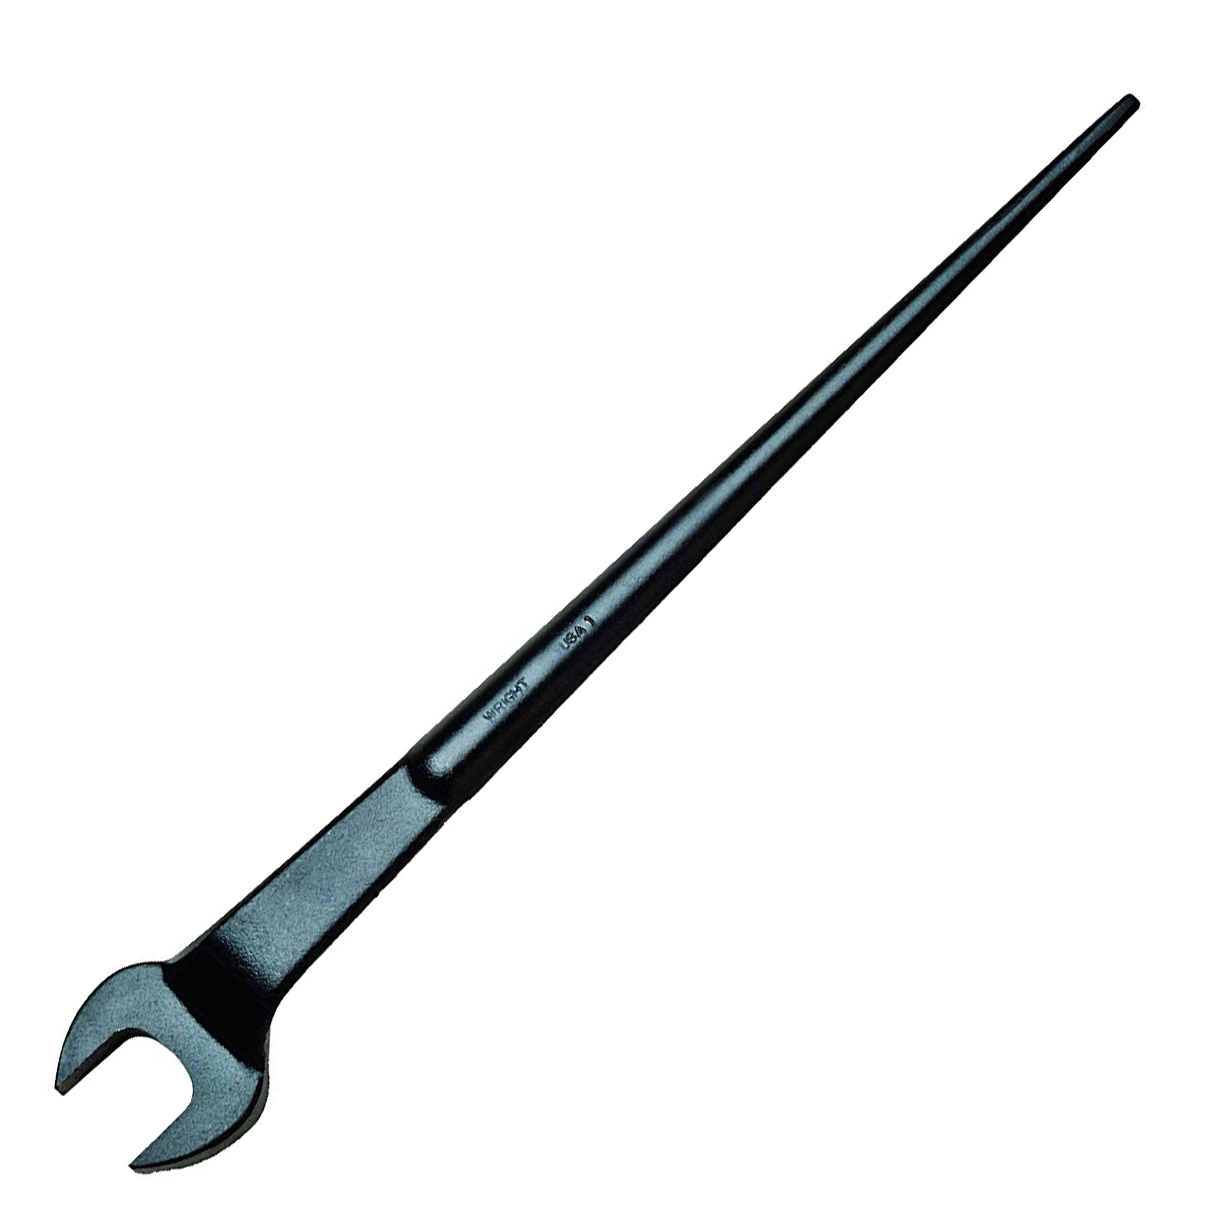 Wright 1" Structural Wrench Offset Head Black #1732 (1732WR)